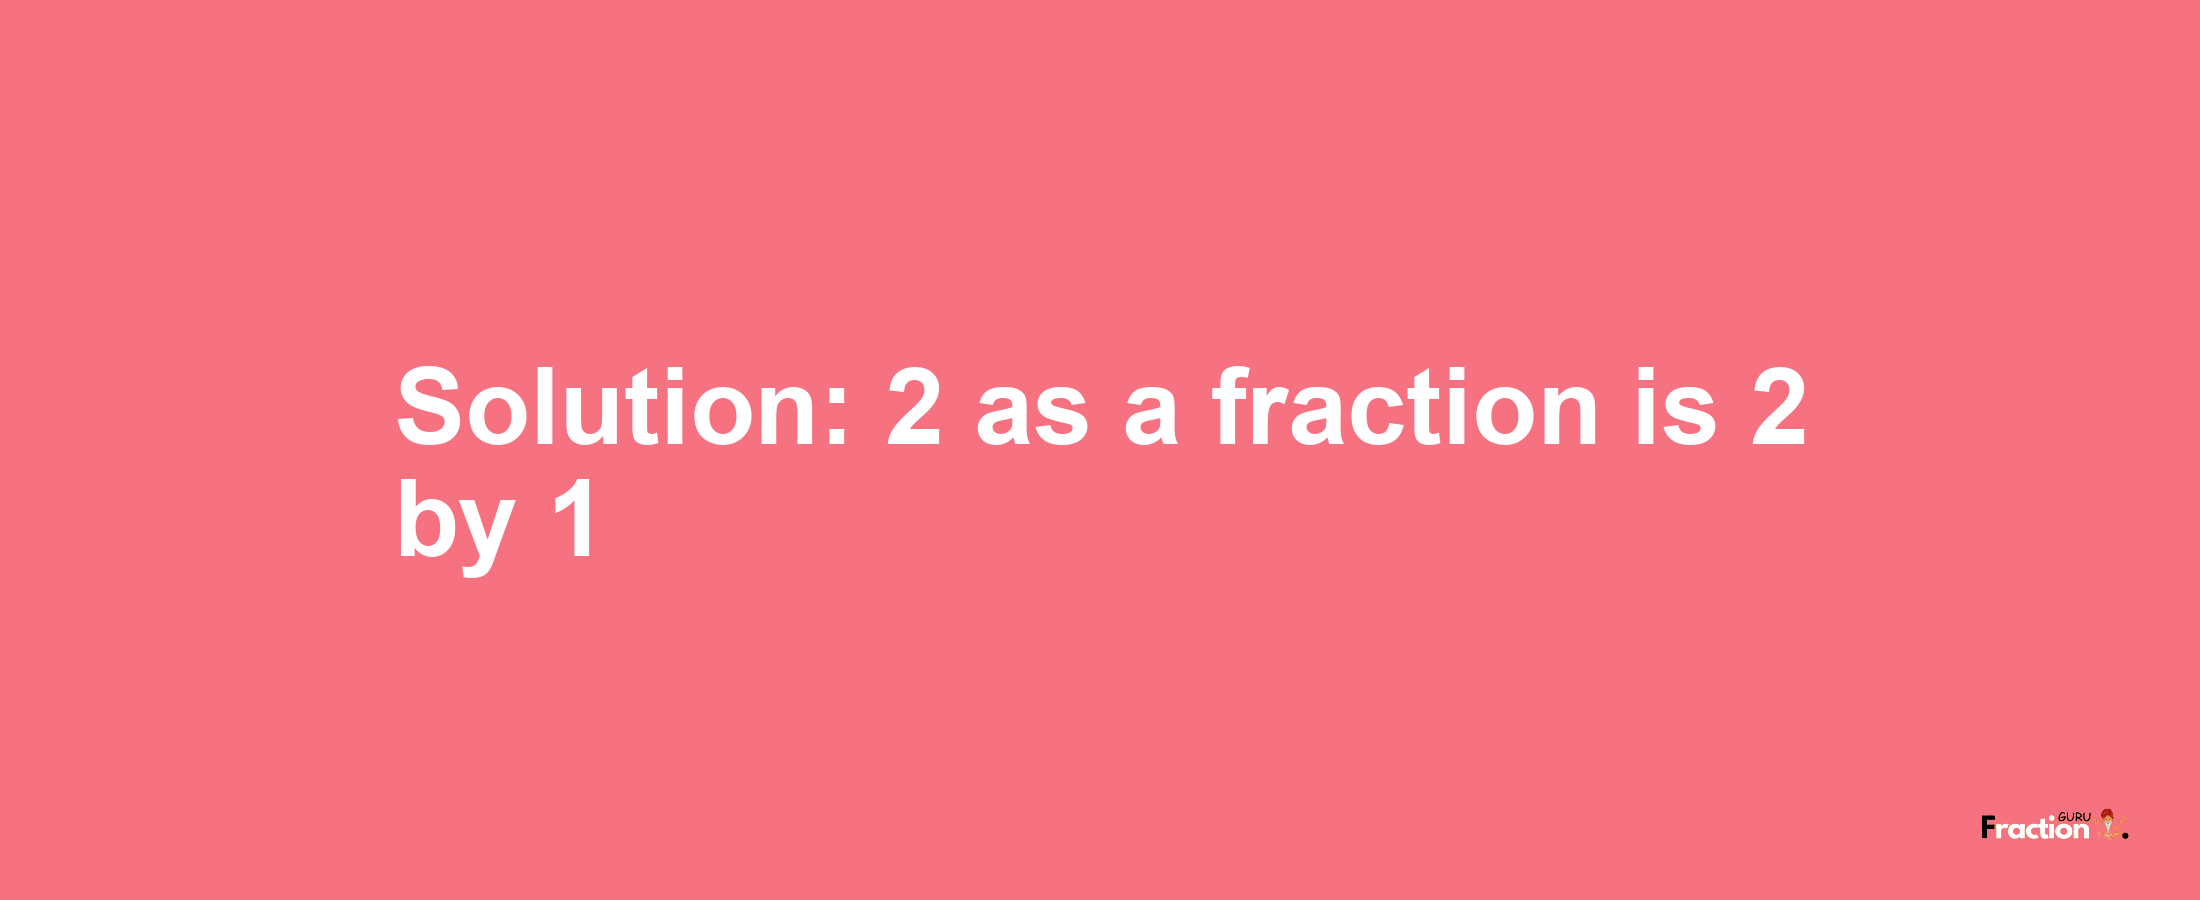 Solution:2 as a fraction is 2/1